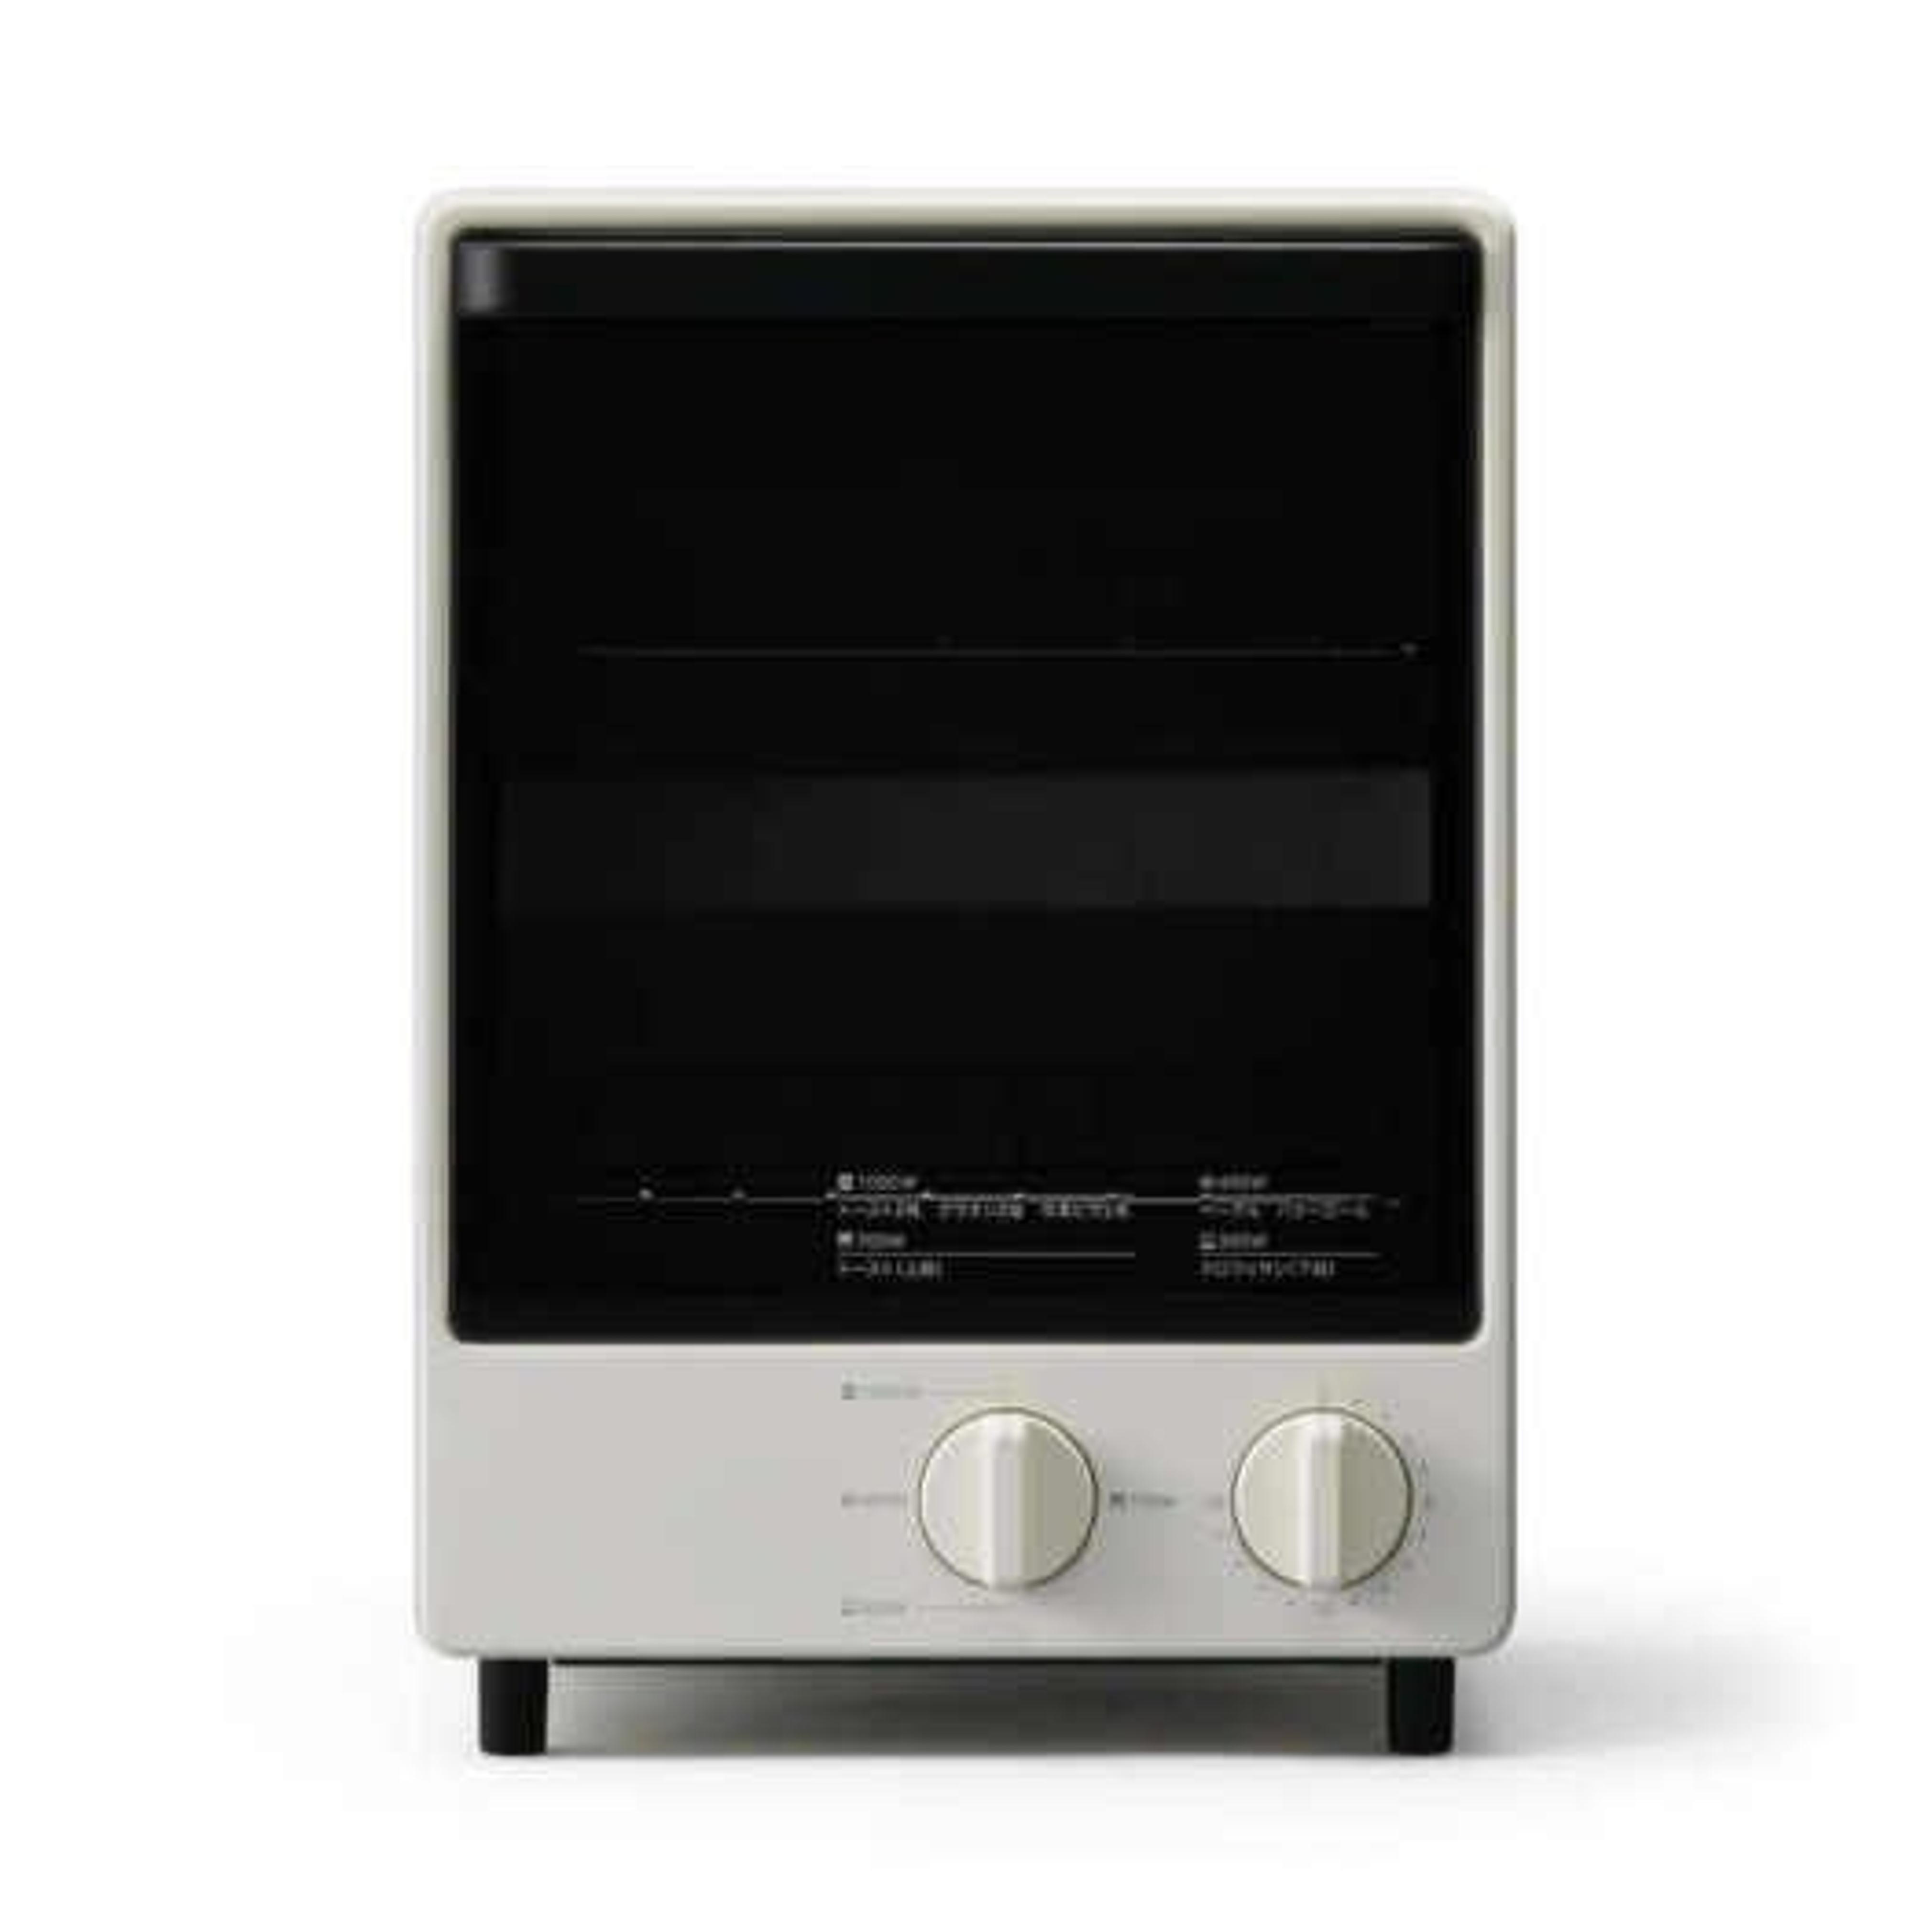 MoMA MUJI Toaster Oven Vertical Type MJ-OTL10A from Japan